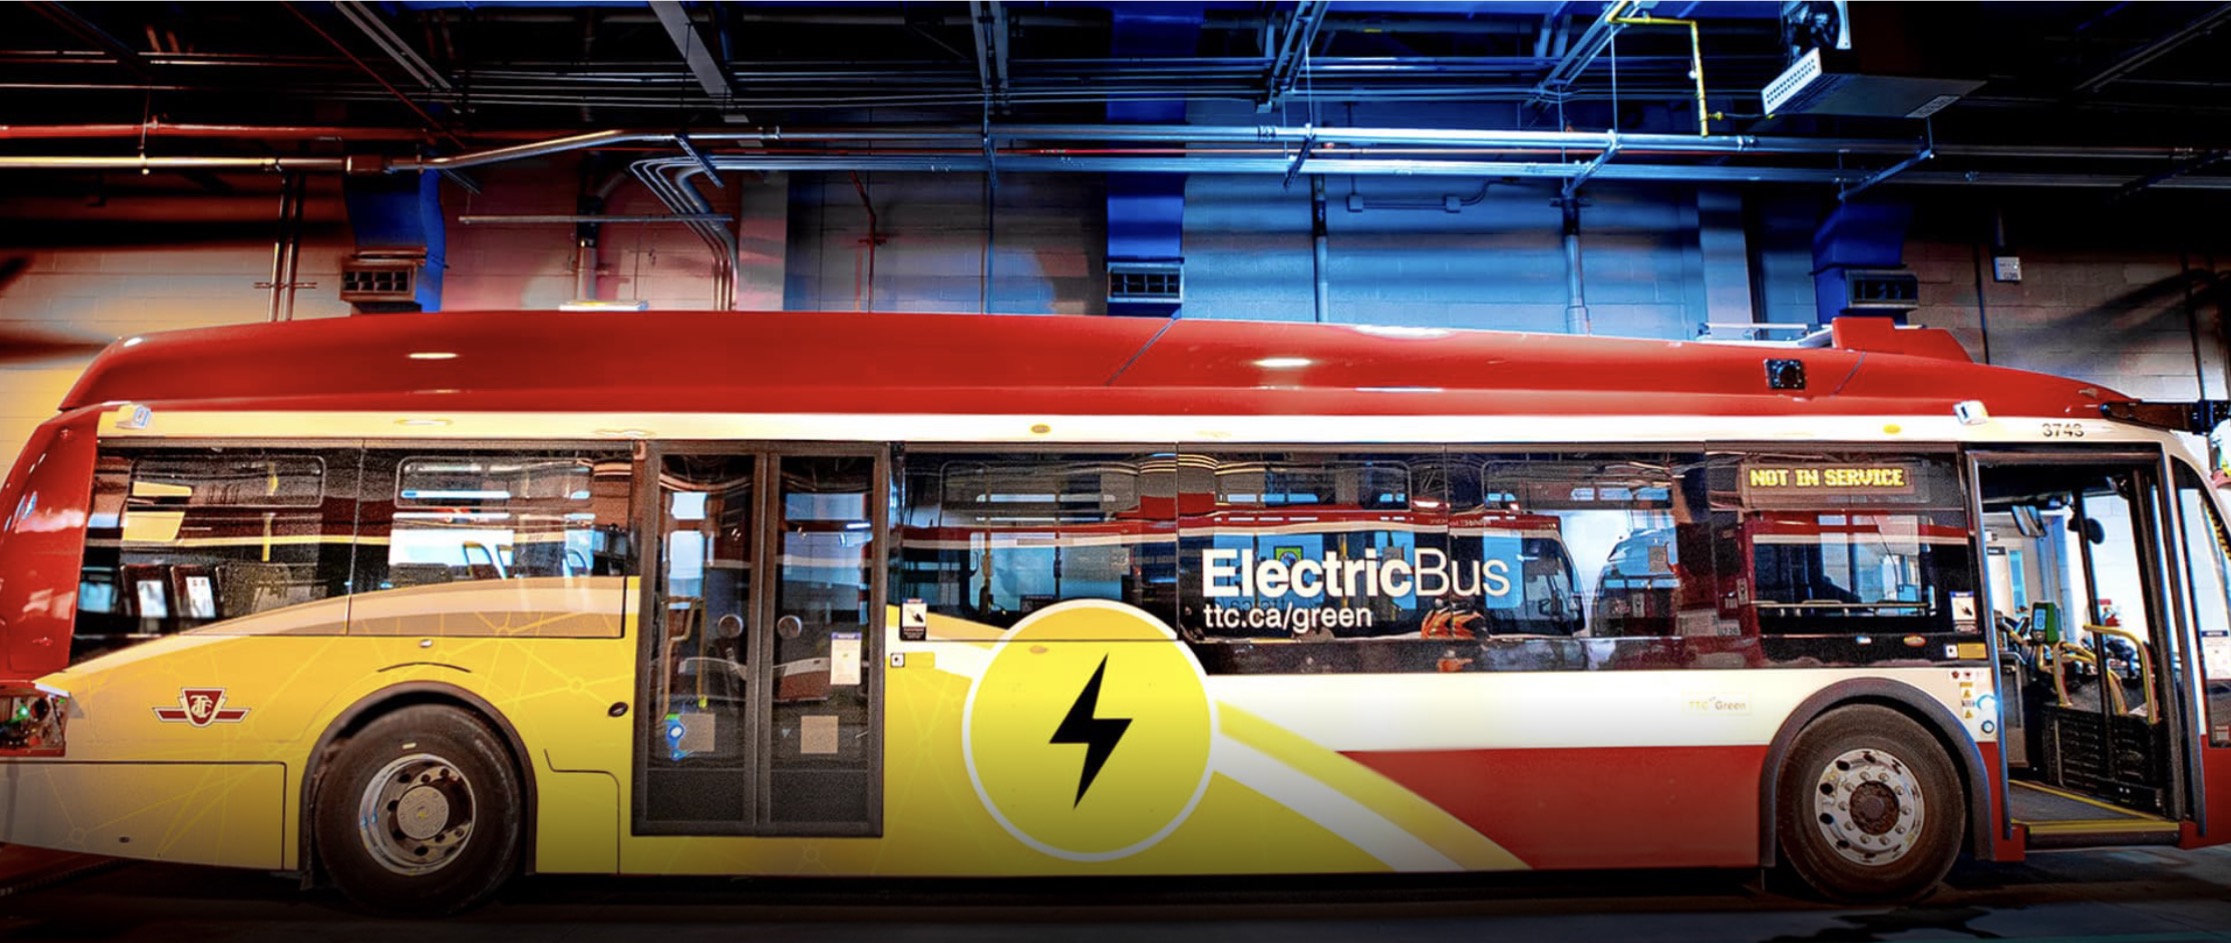 to enhance public transit systems and switch them to cleaner electrical power, including supporting the purchase of zero-emission public transit and school buses.